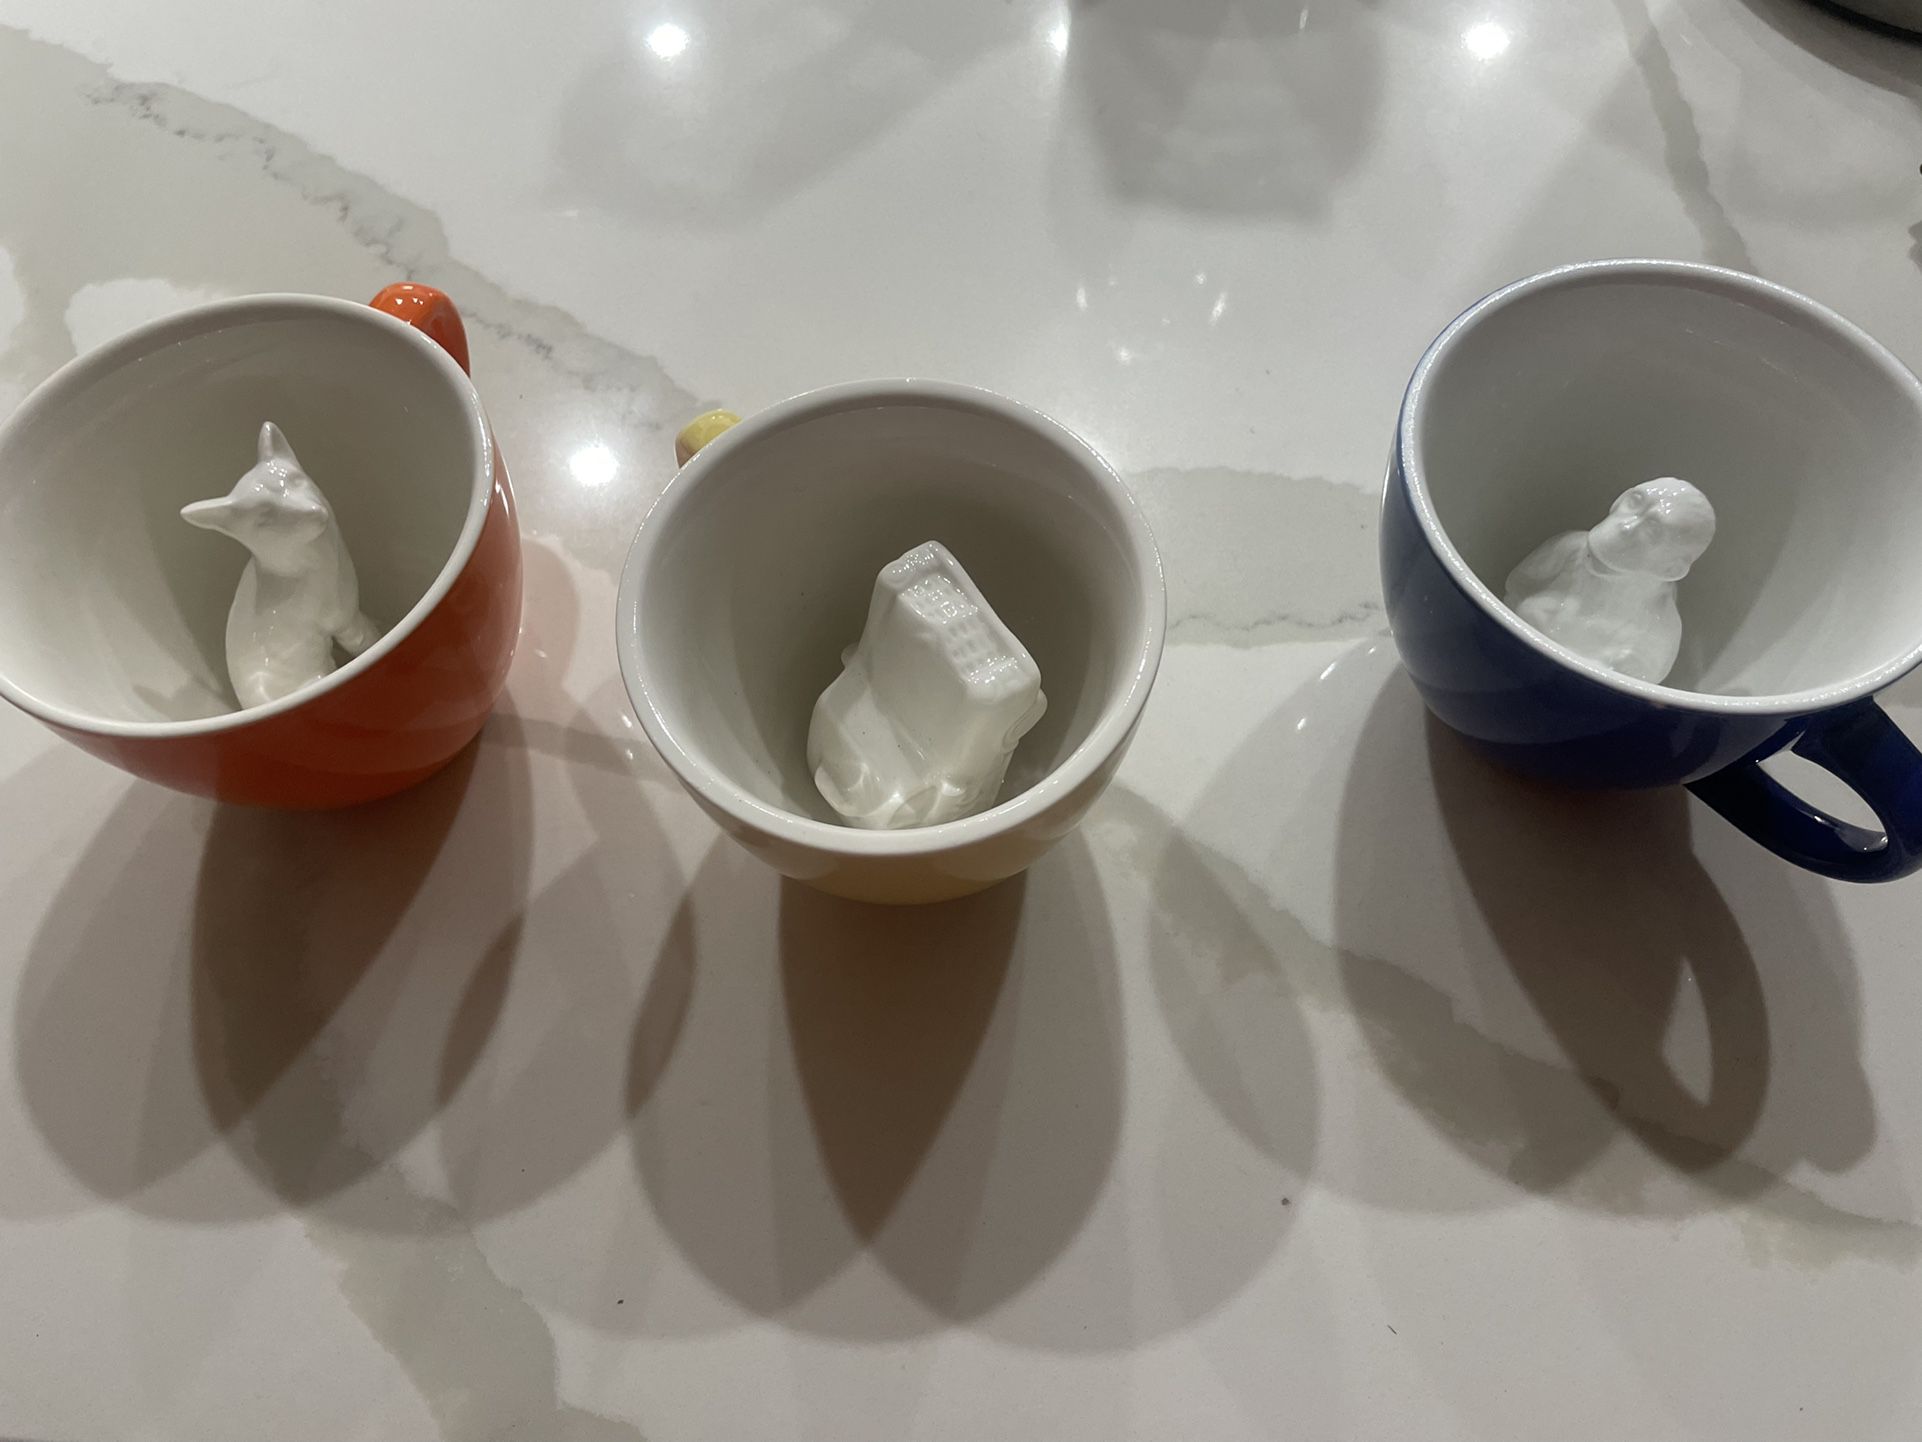 Tea Cups With Animals Inside $4 Each